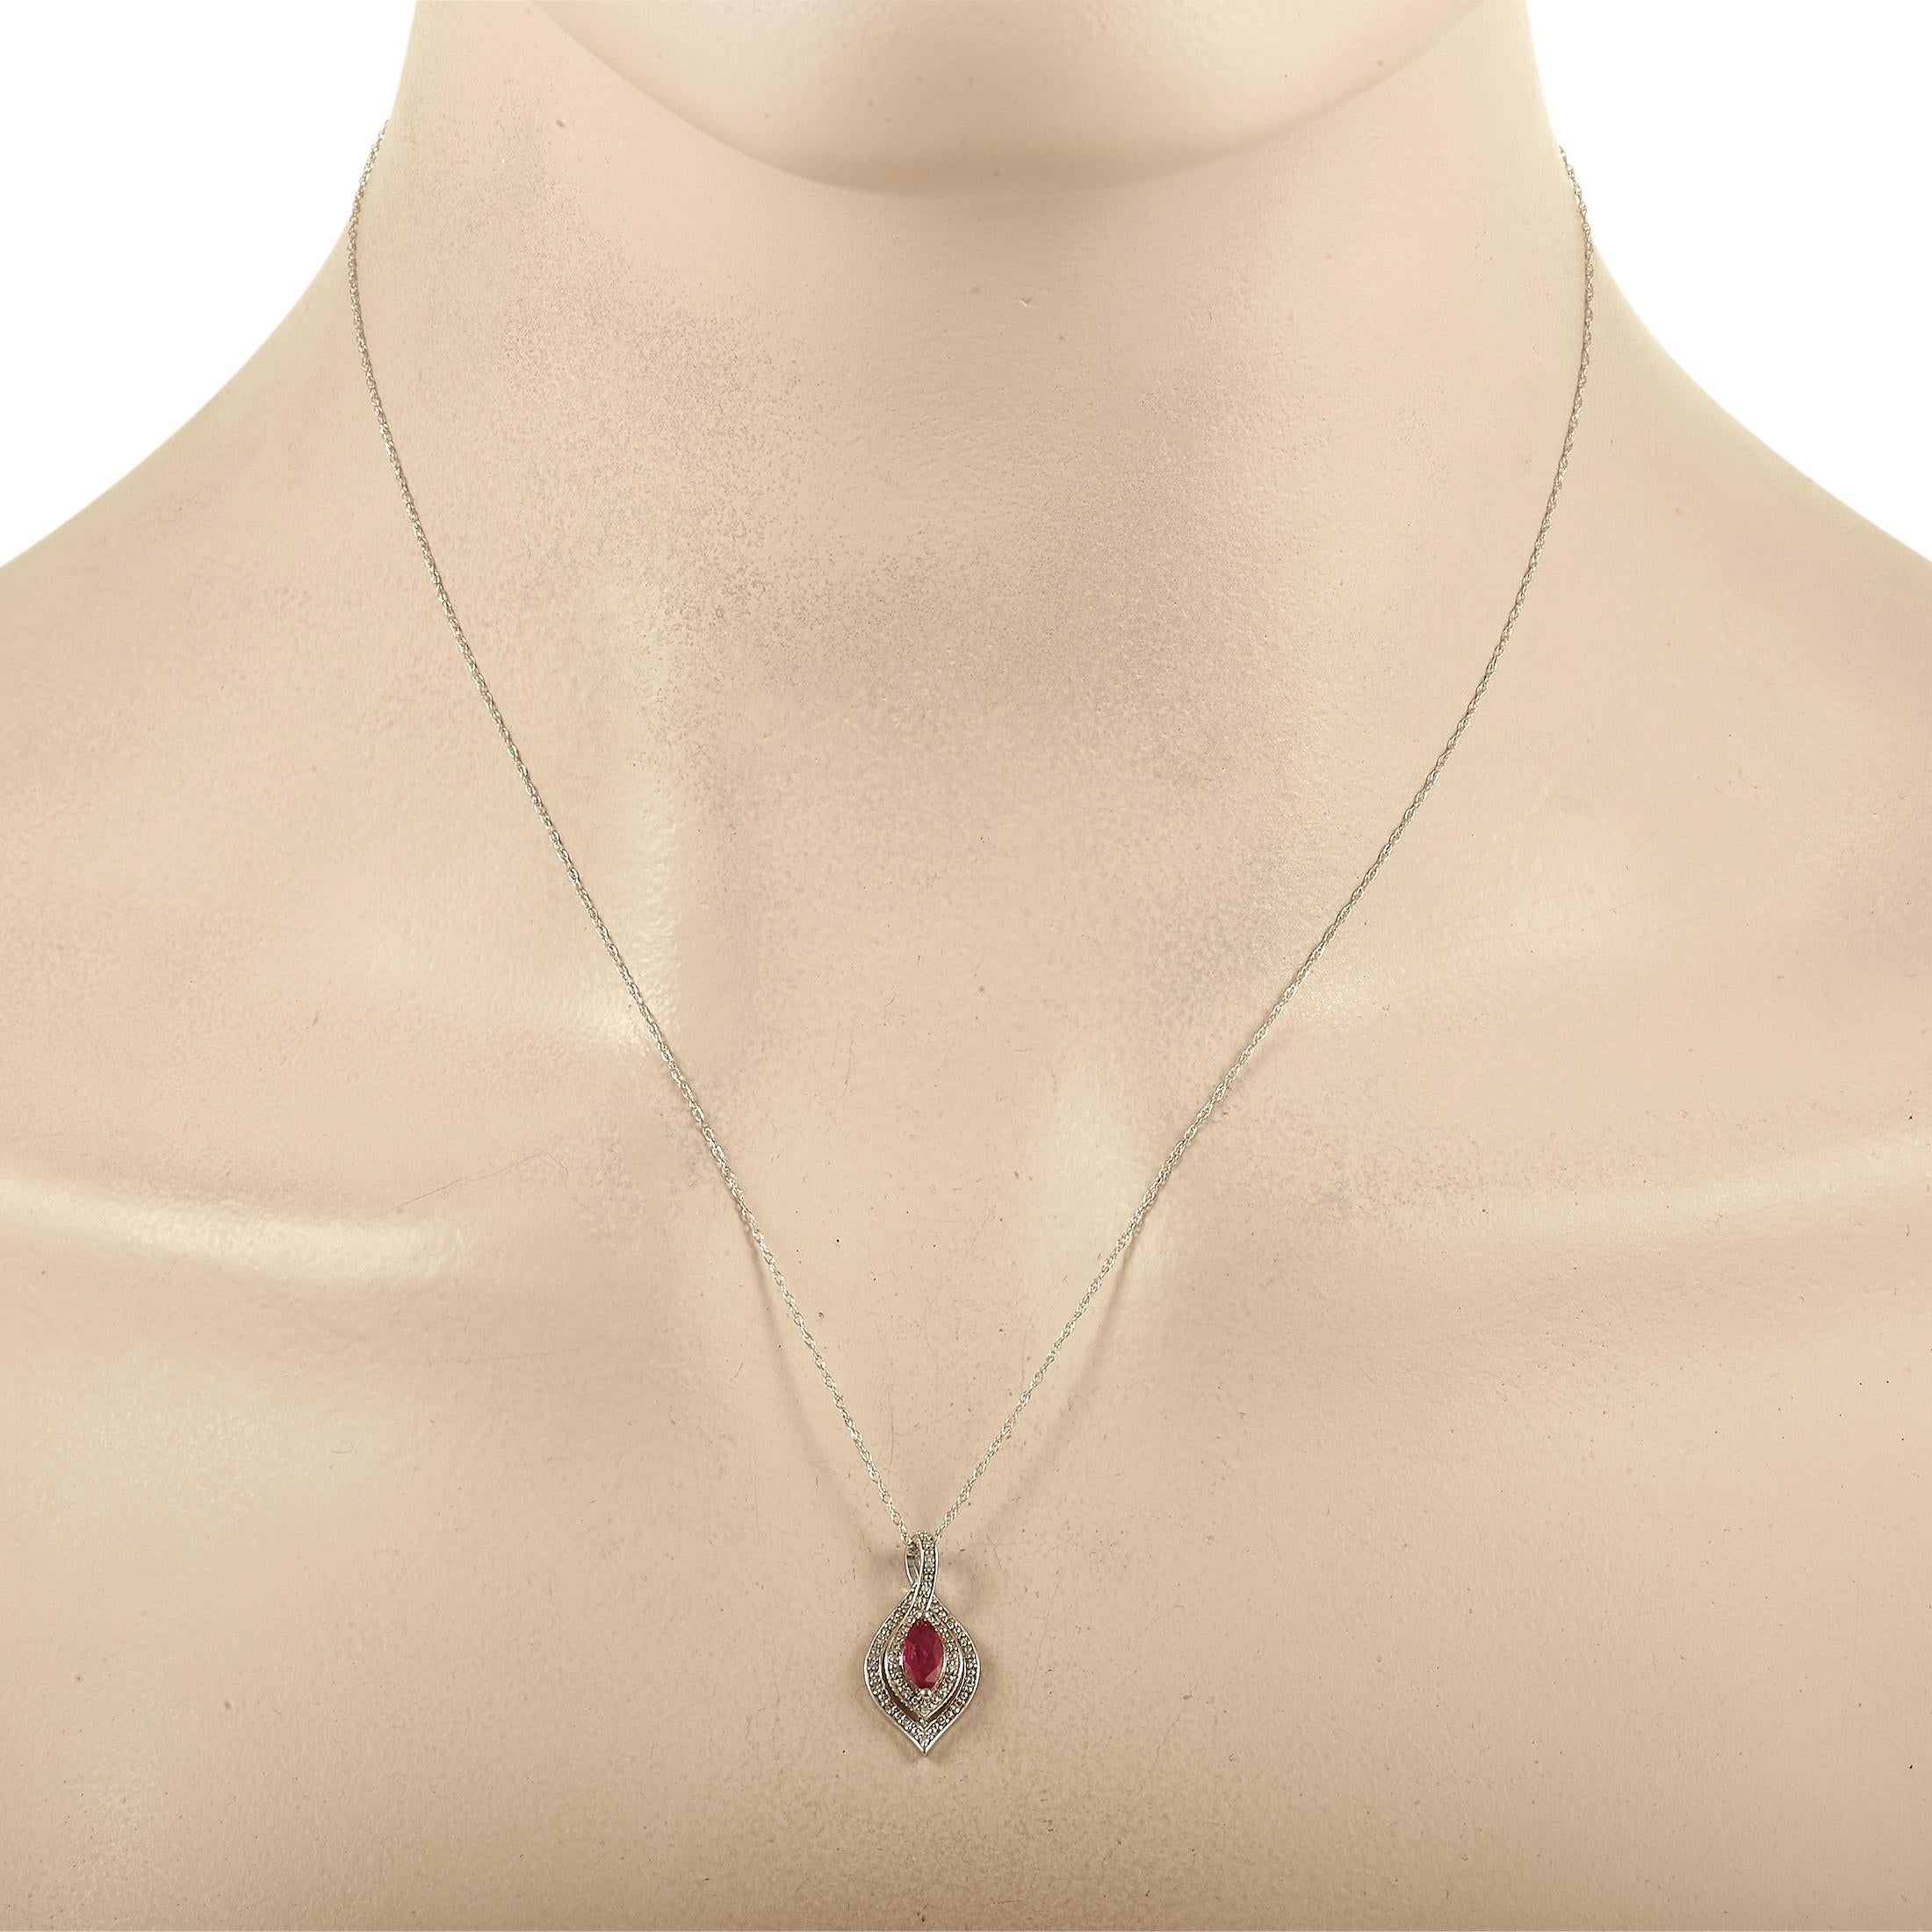 Simple and luxurious, this necklace is the picture of sophistication. At the center of the 14K White Gold pendant - which measures 0.75” long and 0.45” wide - you’ll find a breathtaking ruby gemstone surrounded by diamonds totaling 0.08 carats. It’s